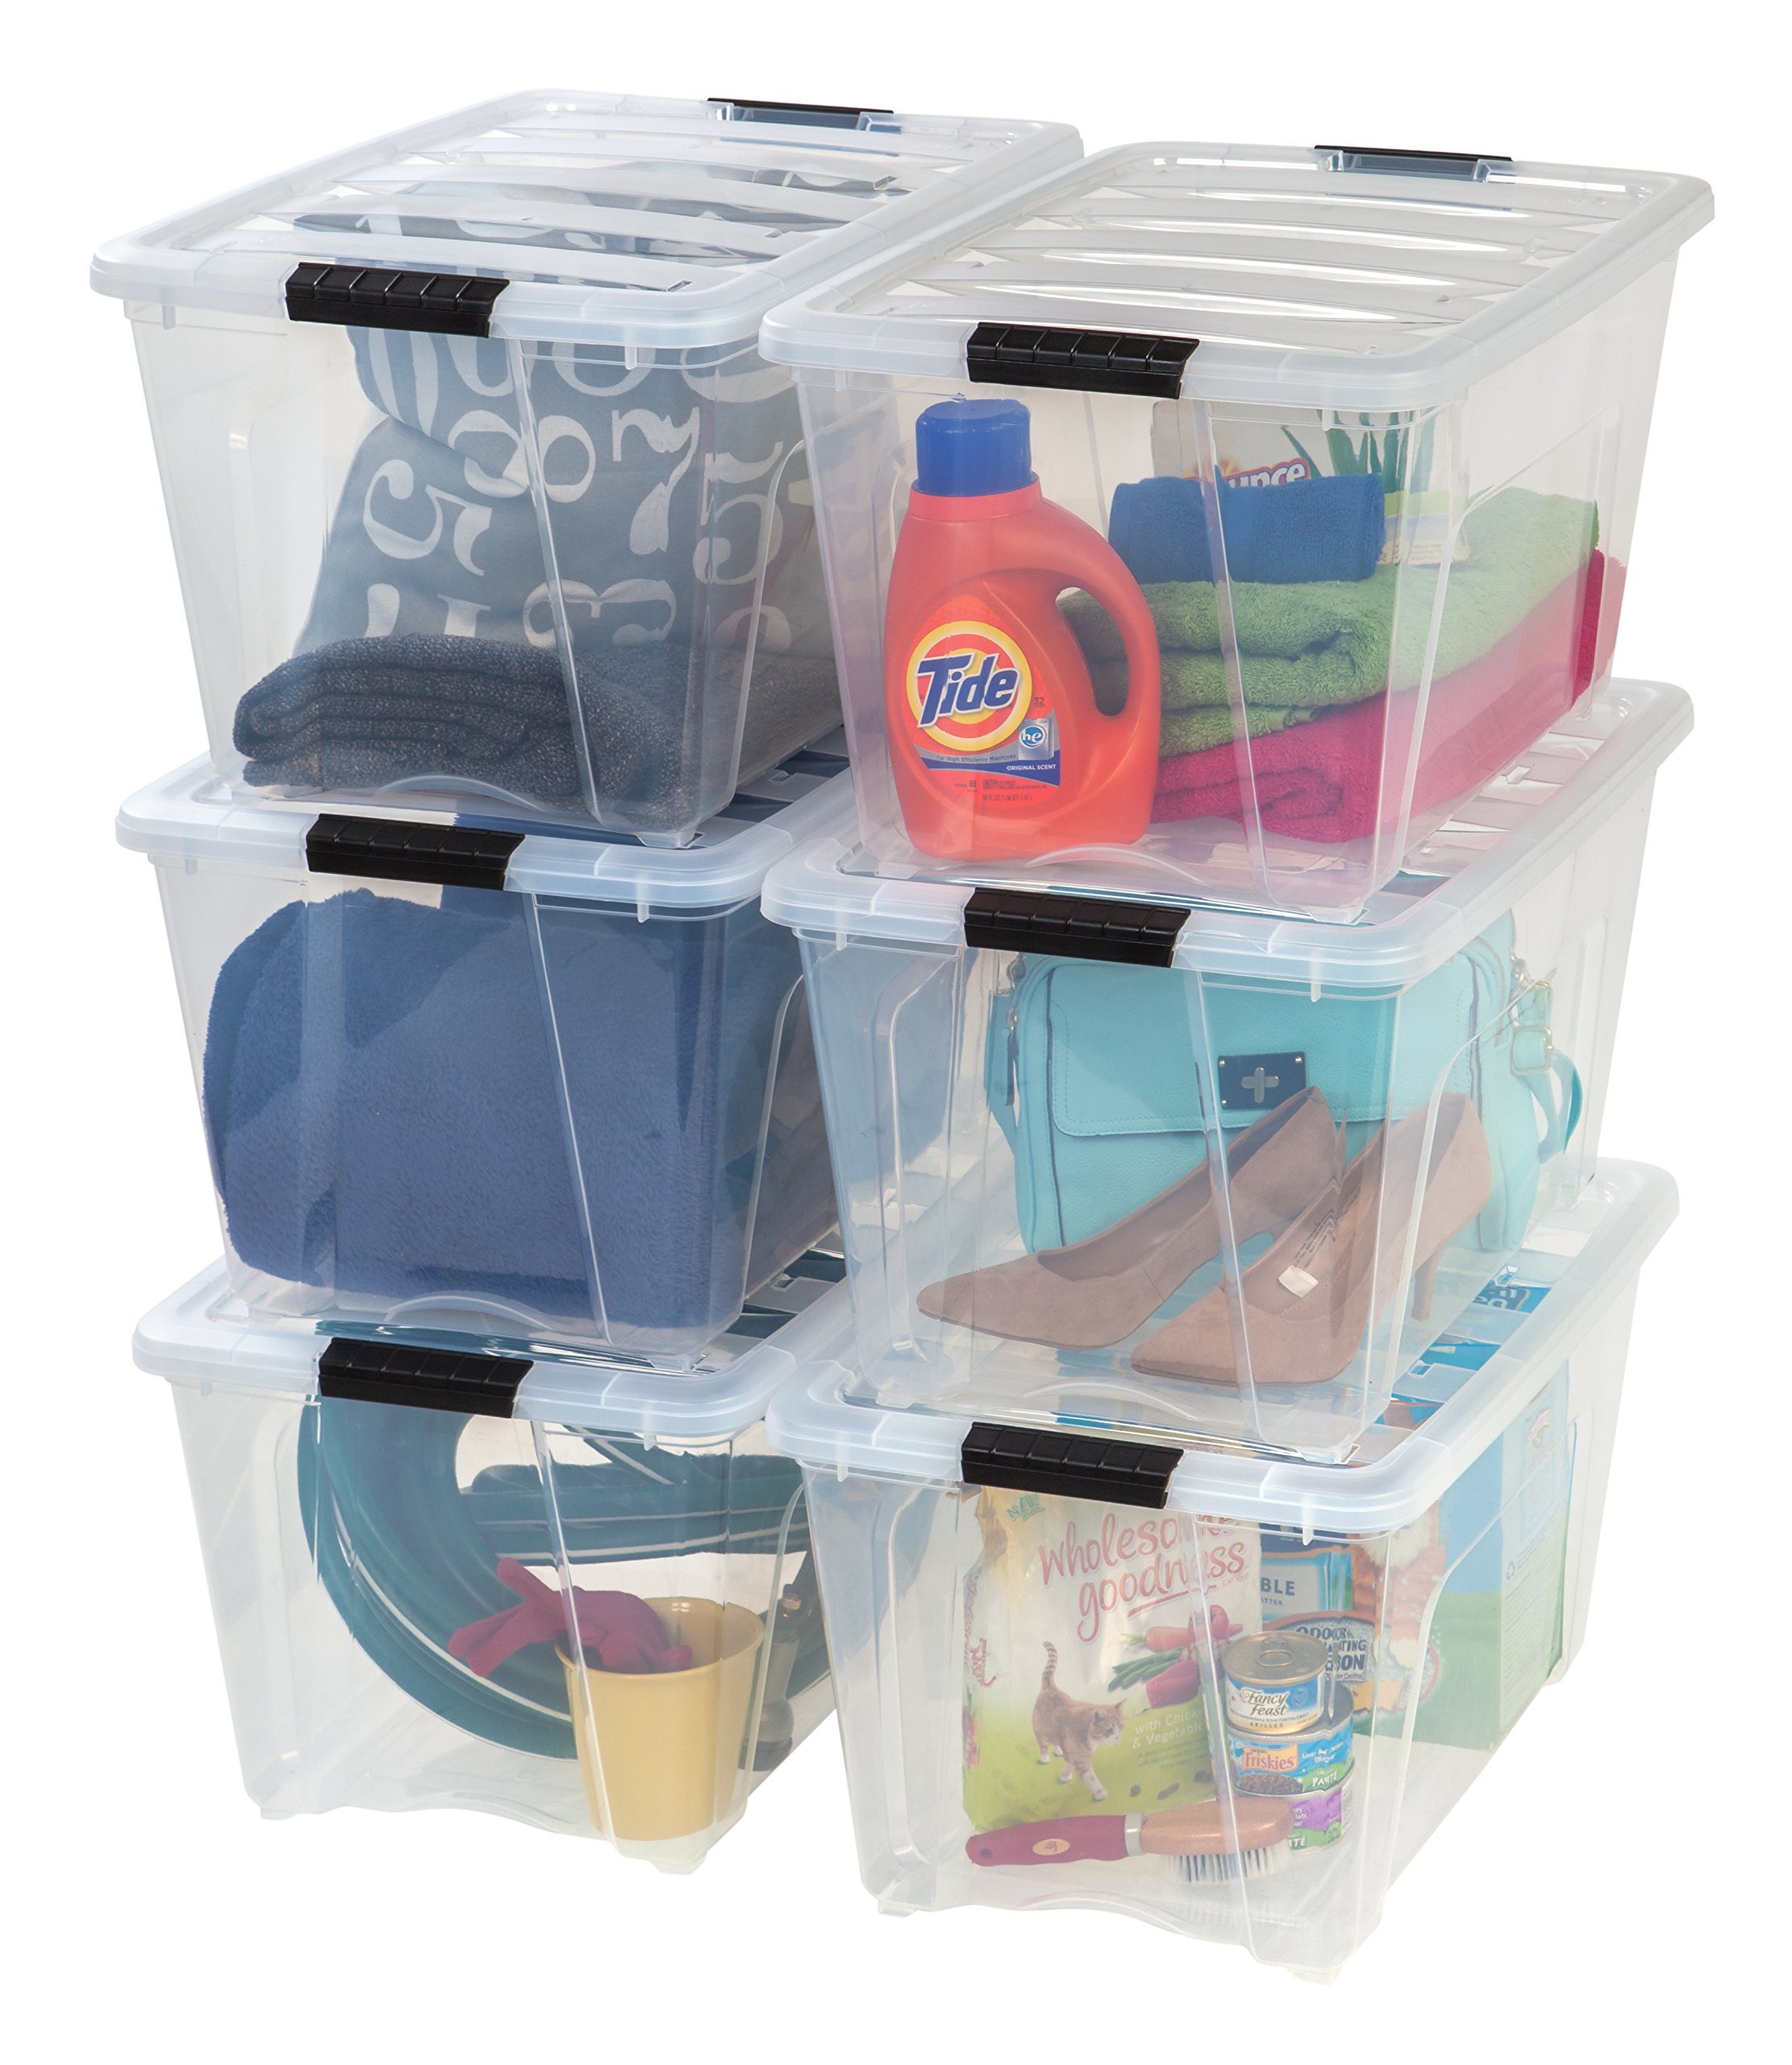 6-Pack 53-Qt Iris USA Stackable Plastic Storage Bins w/ Lids and Latching Buckles $65 + Free Shipping